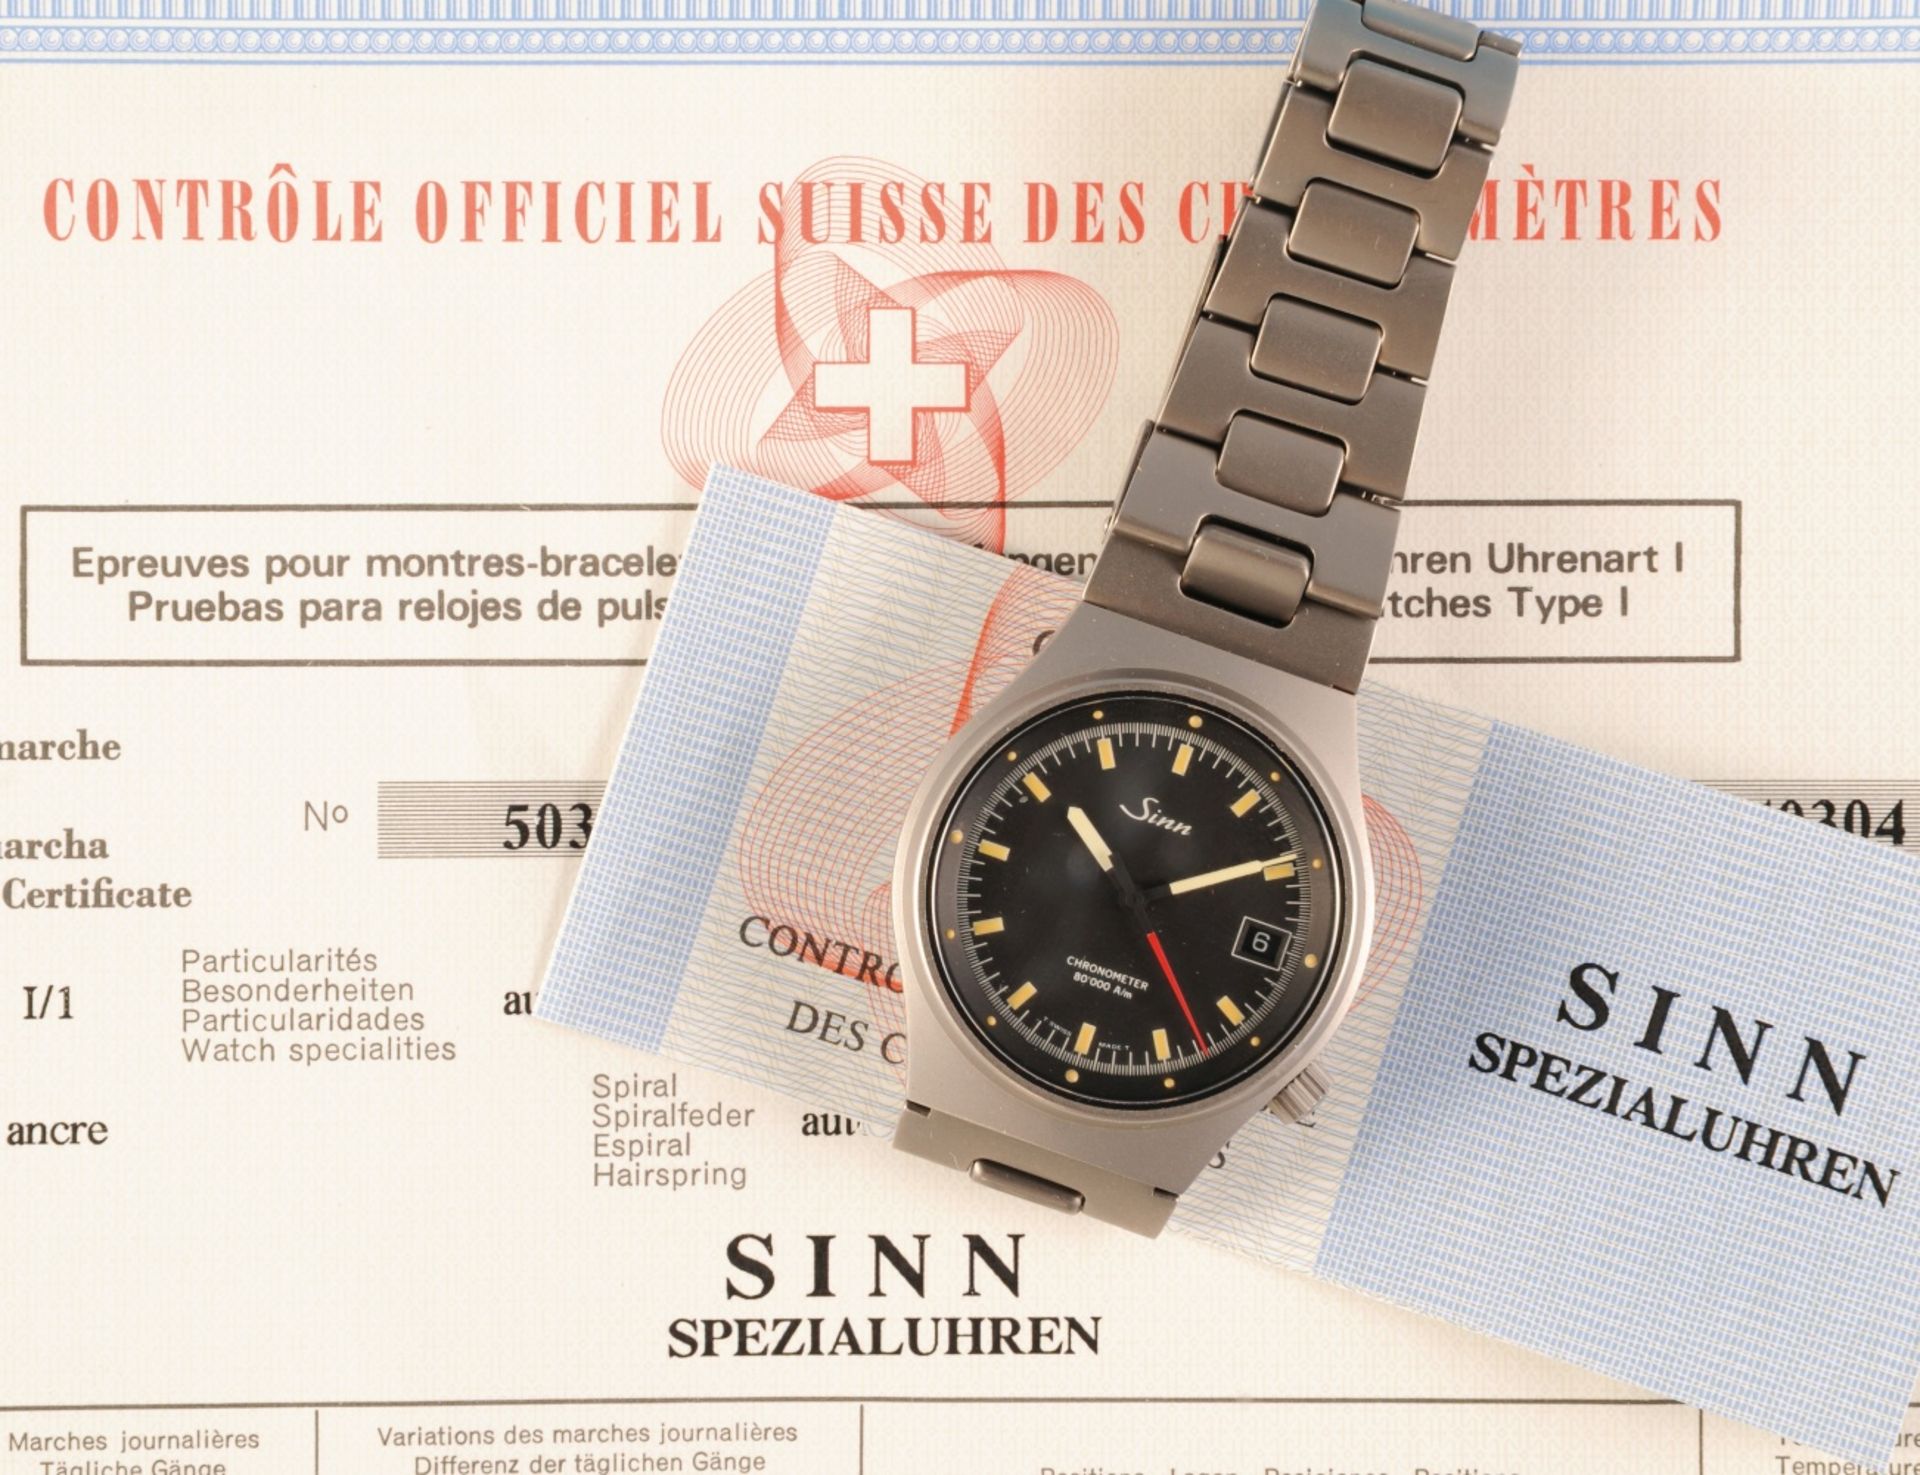 First, newly developed Sinn watch of the Lothar Schmidt era after the takeover in 1994. Introduced i